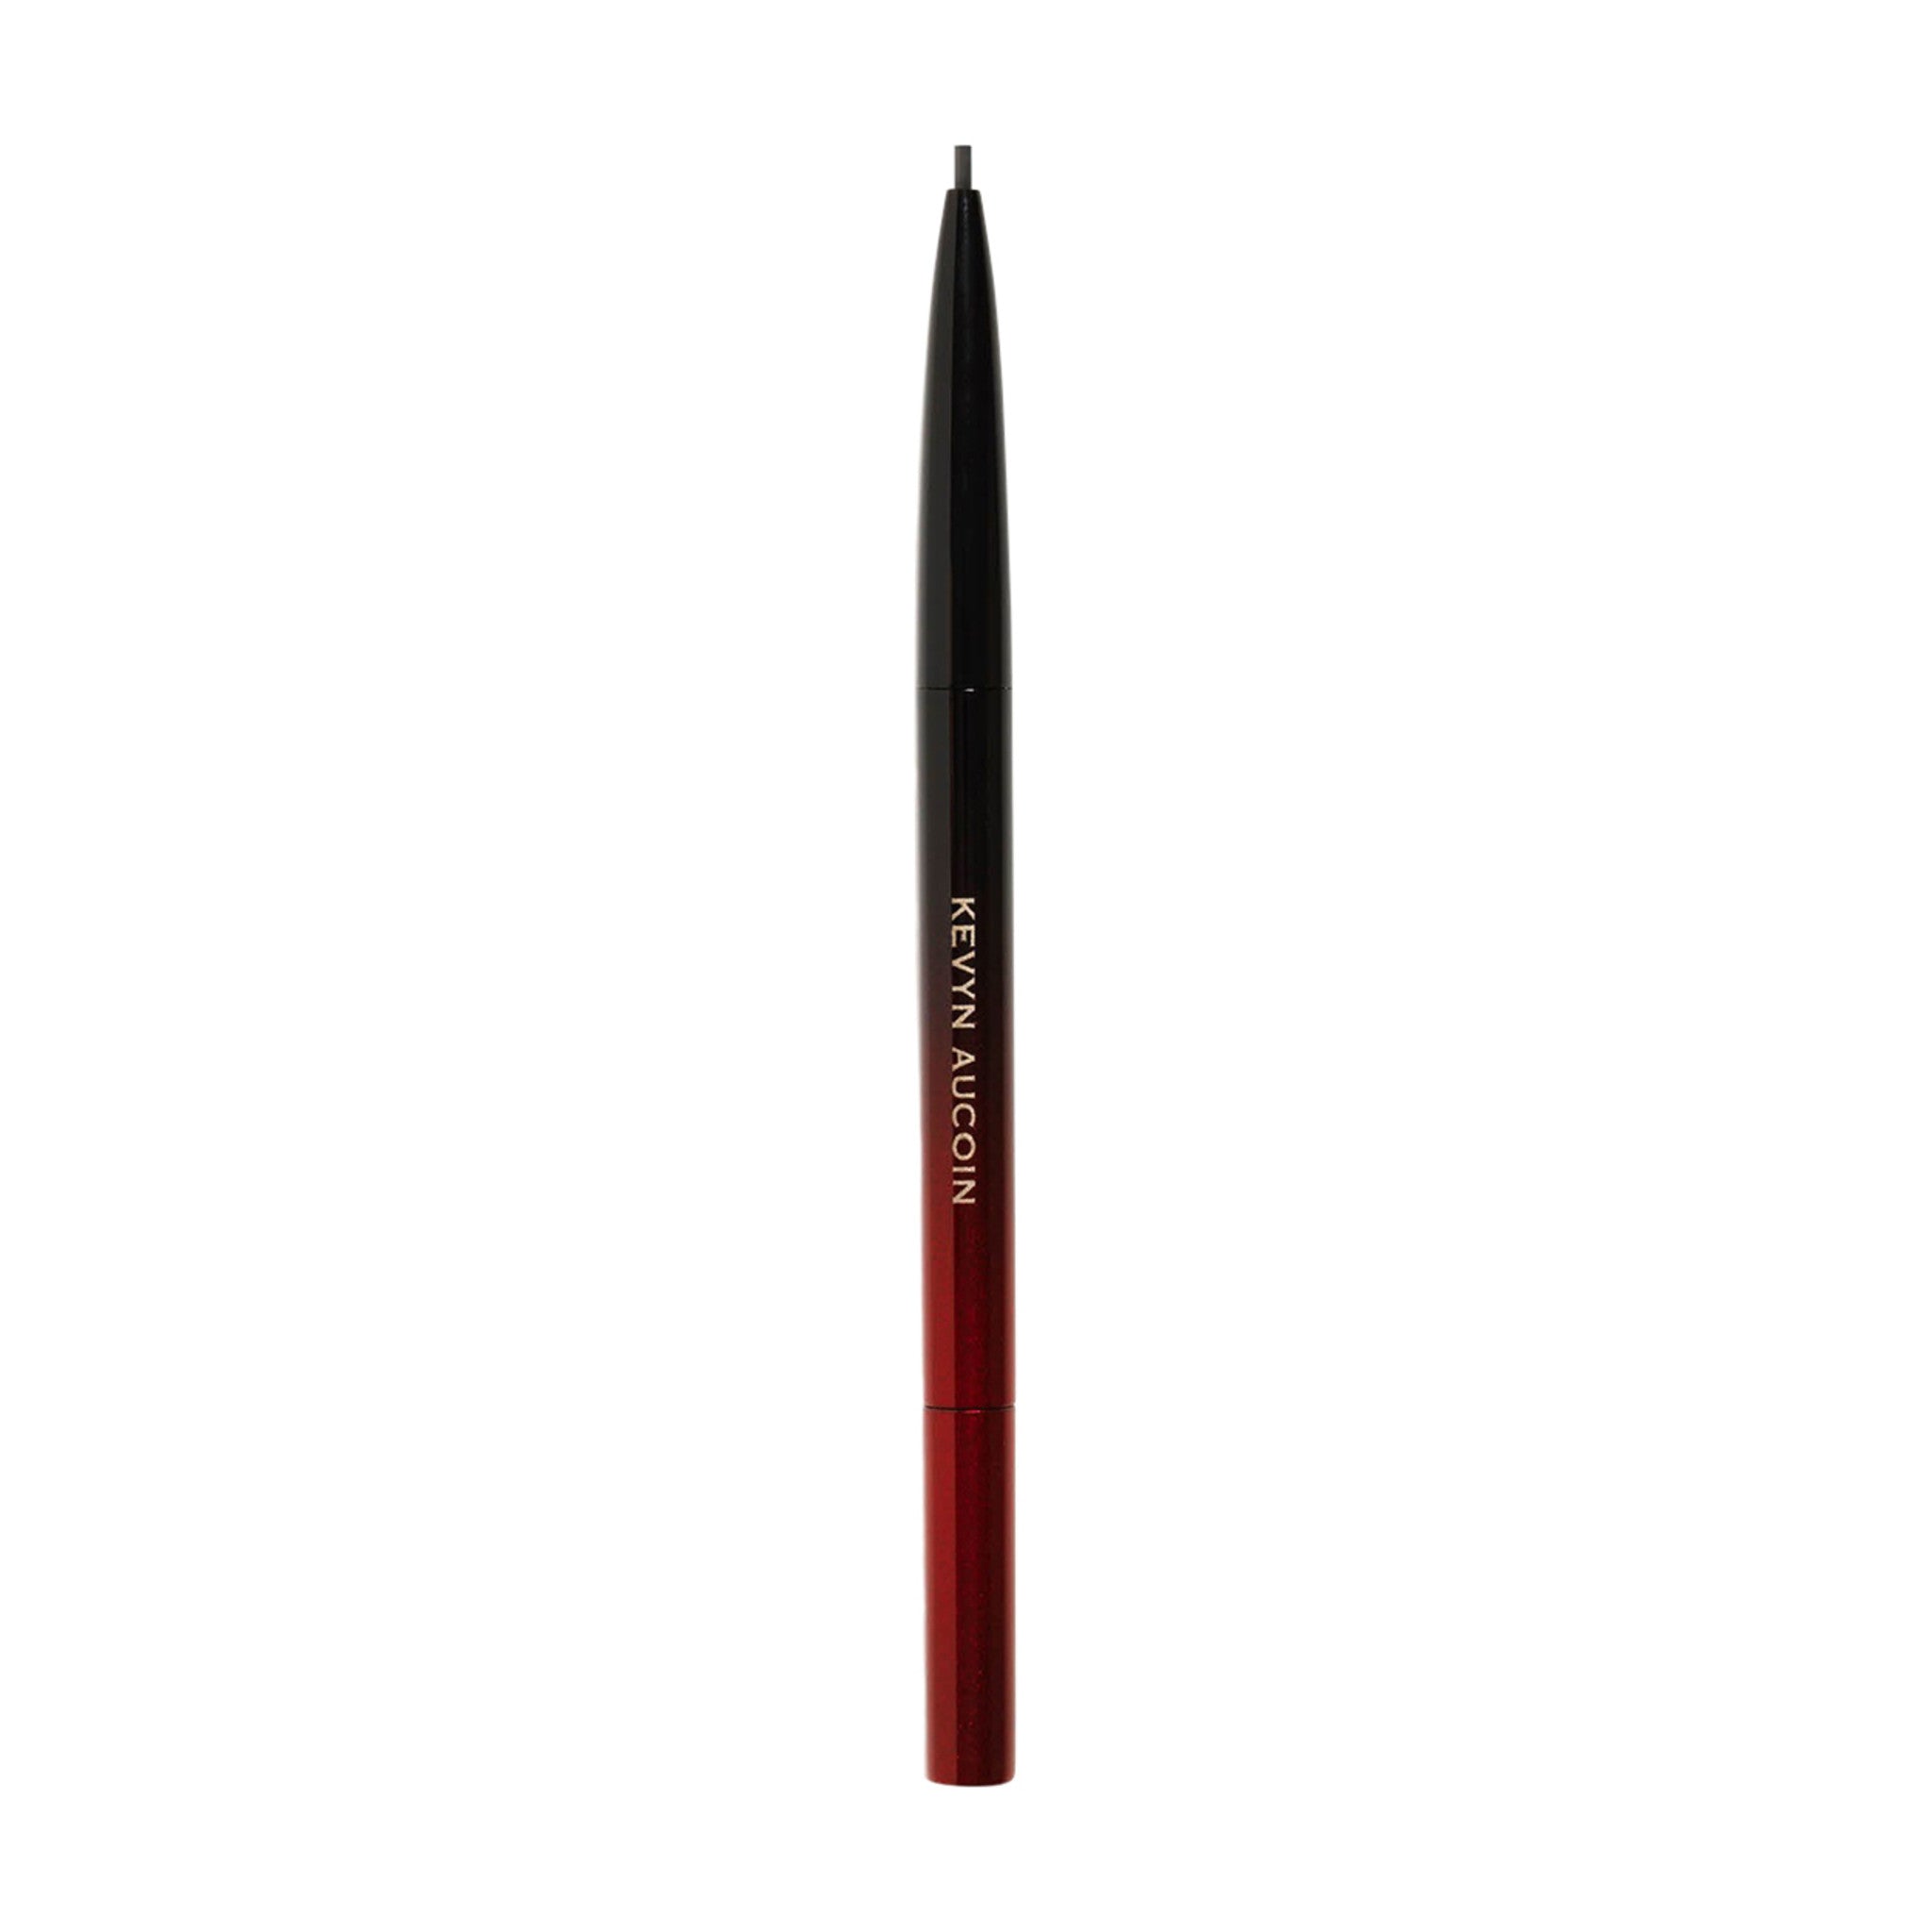 Kevyn Aucoin The Precision Brow Pencil Color/Shade variant: Brunette main image. This product is in the color brown